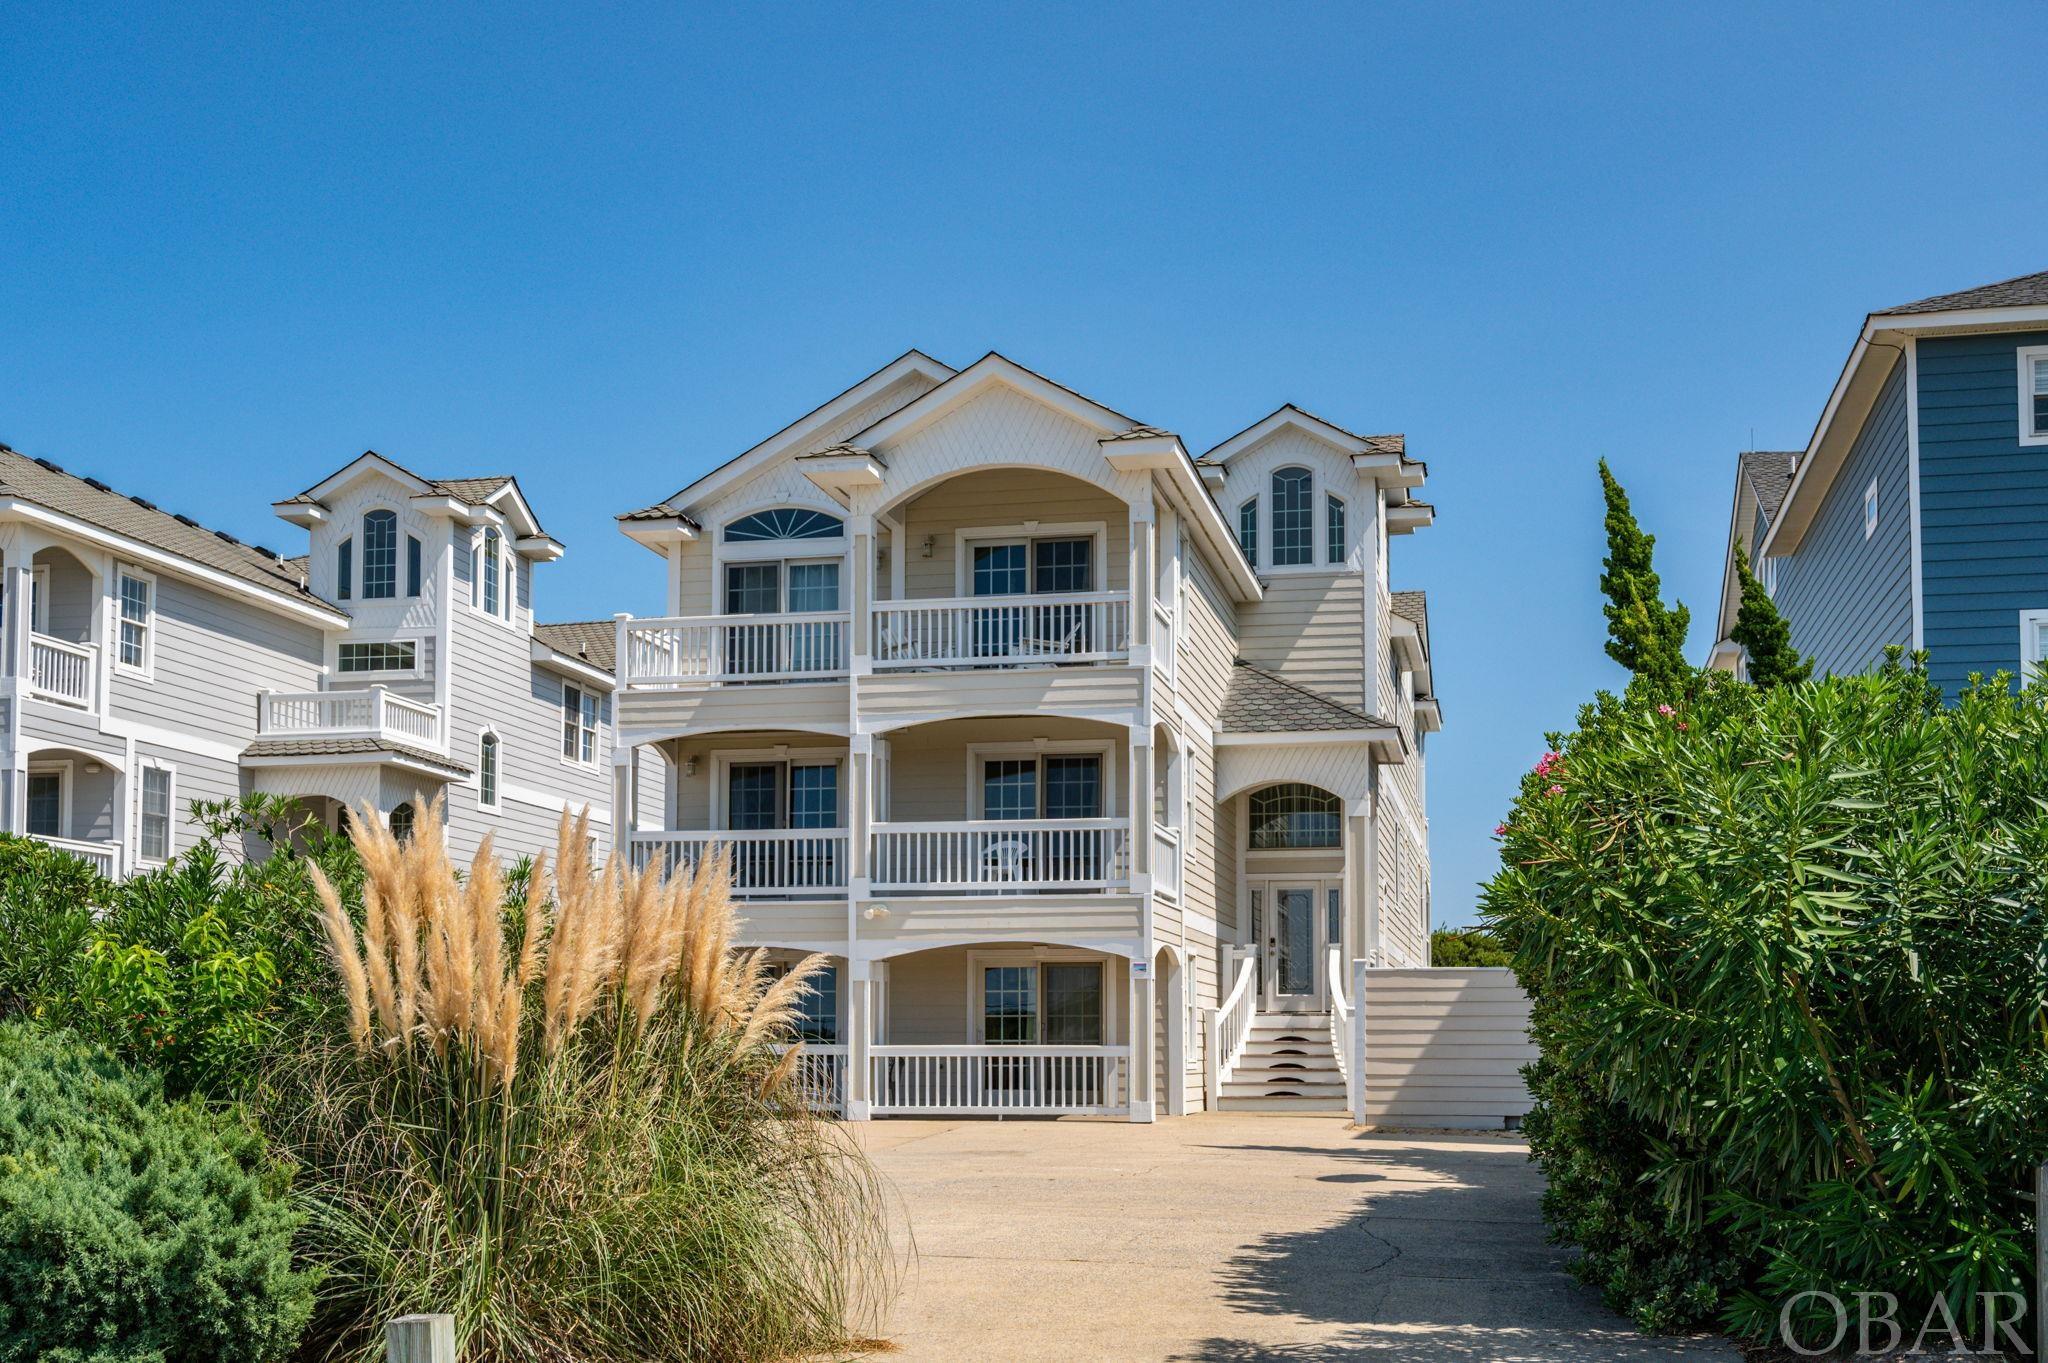 OVER $272,000 BOOKED FOR 2021 IN 31 WEEKS AND $279,380 PRE-BOOKED FOR 2022 IN JUST 28 WEEKS! THIS HOUSE WILL DO OVER $280K. Oceanfront estate with ten bedrooms and amenities galore. Over 5,800 square feet of heated living area. RECENT UPDATES INCLUDE: Three new HVAC units Installed inside and outside 2018. New Exterior paint 2019-2020. New Water Heaters 2020. New Kitchen Appliances 2019. Designed to impress, this grand home offers stylish furnishings and upgrades, an elevator, luxurious master suites with private baths and sensational entertainment options on each level. Centrally located in the town of Kill Devil Hills, guests have easy access to historic landmarks, national parks, family recreation and a multitude of dining and shopping opportunities. The ground floor features a well-equipped recreation room with regulation size pool table, foosball table, plush sofa seating, mounted flat screen and a bar with sink, microwave, full refrigerator, icemaker, dishwasher and bar seating. A private home theater with tiered seating, a projection screen and surround sound, creates an in-house cinematic experience. Soaring ceilings, class columns, shimmering ceramic tile and elegant furnishings greet you as you ascend to the top level. A grand king master suite completes the top floor and has a private balcony the best place to catch a sunset, sitting area, seasonal fireplace, flat screen TV, mini refrigerator and a Jacuzzi tub living space all of its own, with a waterfall, sculpted pool, hot tub and cabana bar with bathroom and rooftop sundeck. The volleyball area will keep the athletes entertained, while an exterior speaker system ensures that the music is always playing. Ample outdoor furniture allows for lounging under sunny coastal skies. Don't forget the boardwalk to you own private beach access!!!